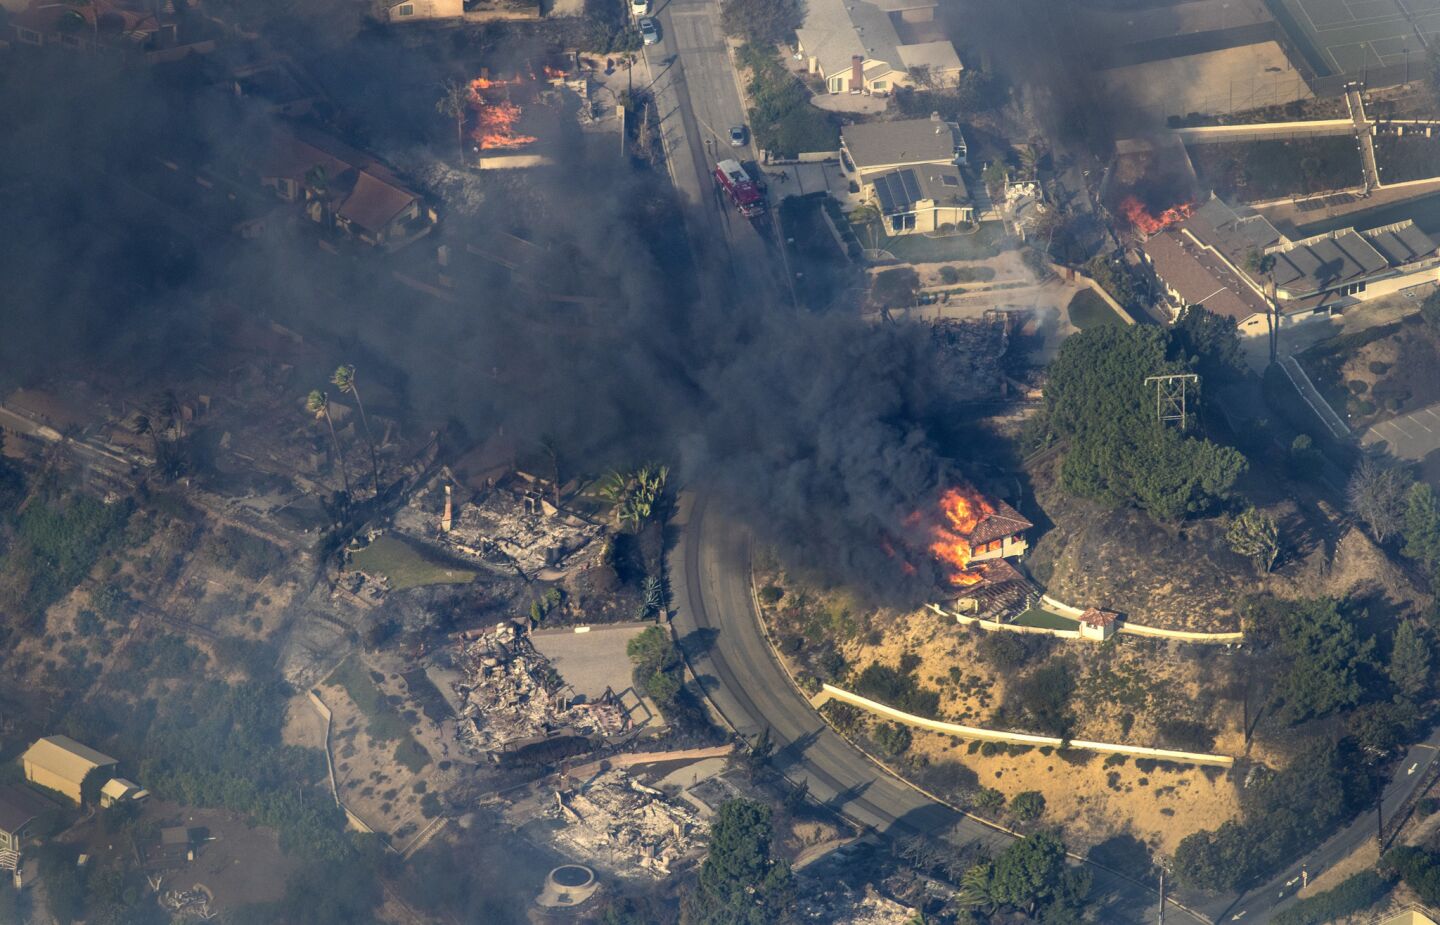 Aerial view of the Thomas fire in Ventura County.